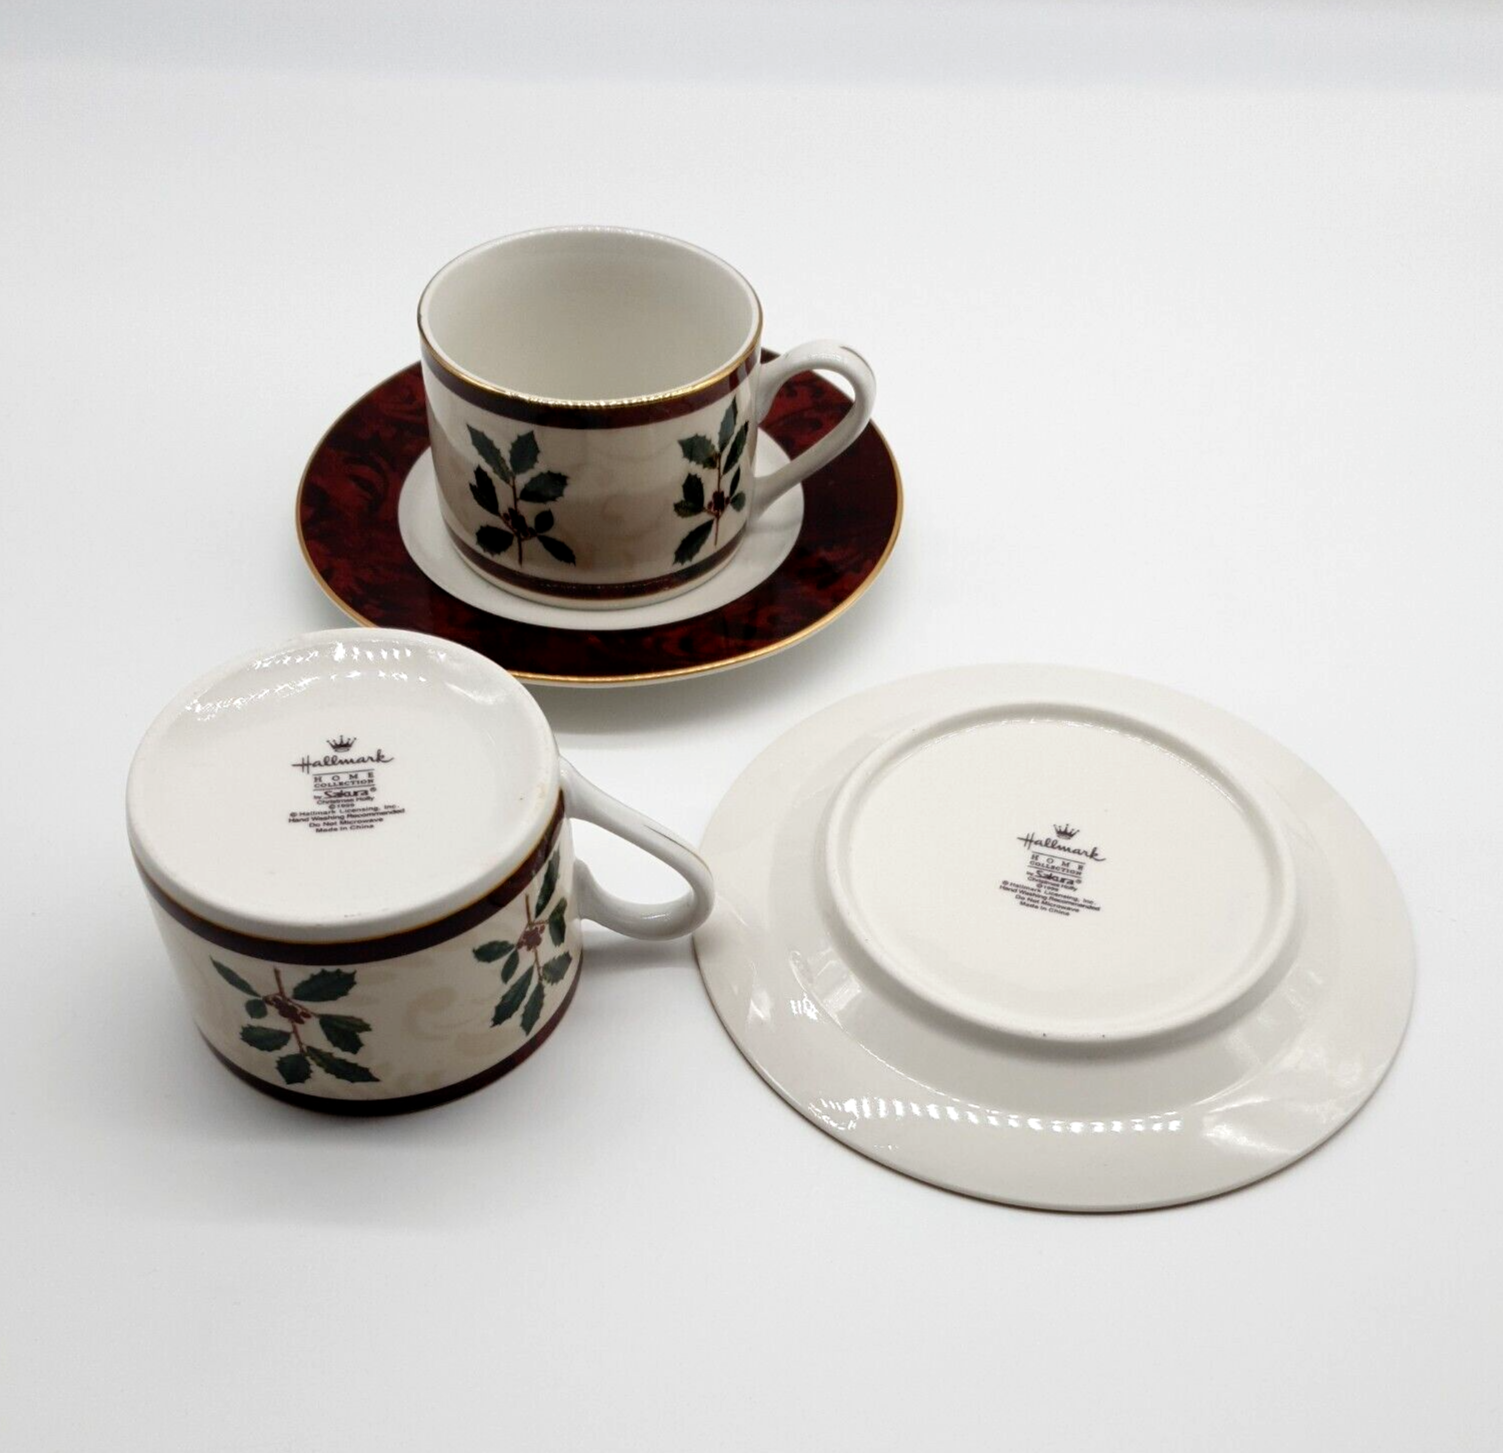 Hallmark Home Collection 1999 Chirstmas Holly Coffee Cups and Saucers (Set of 2) - $29.70